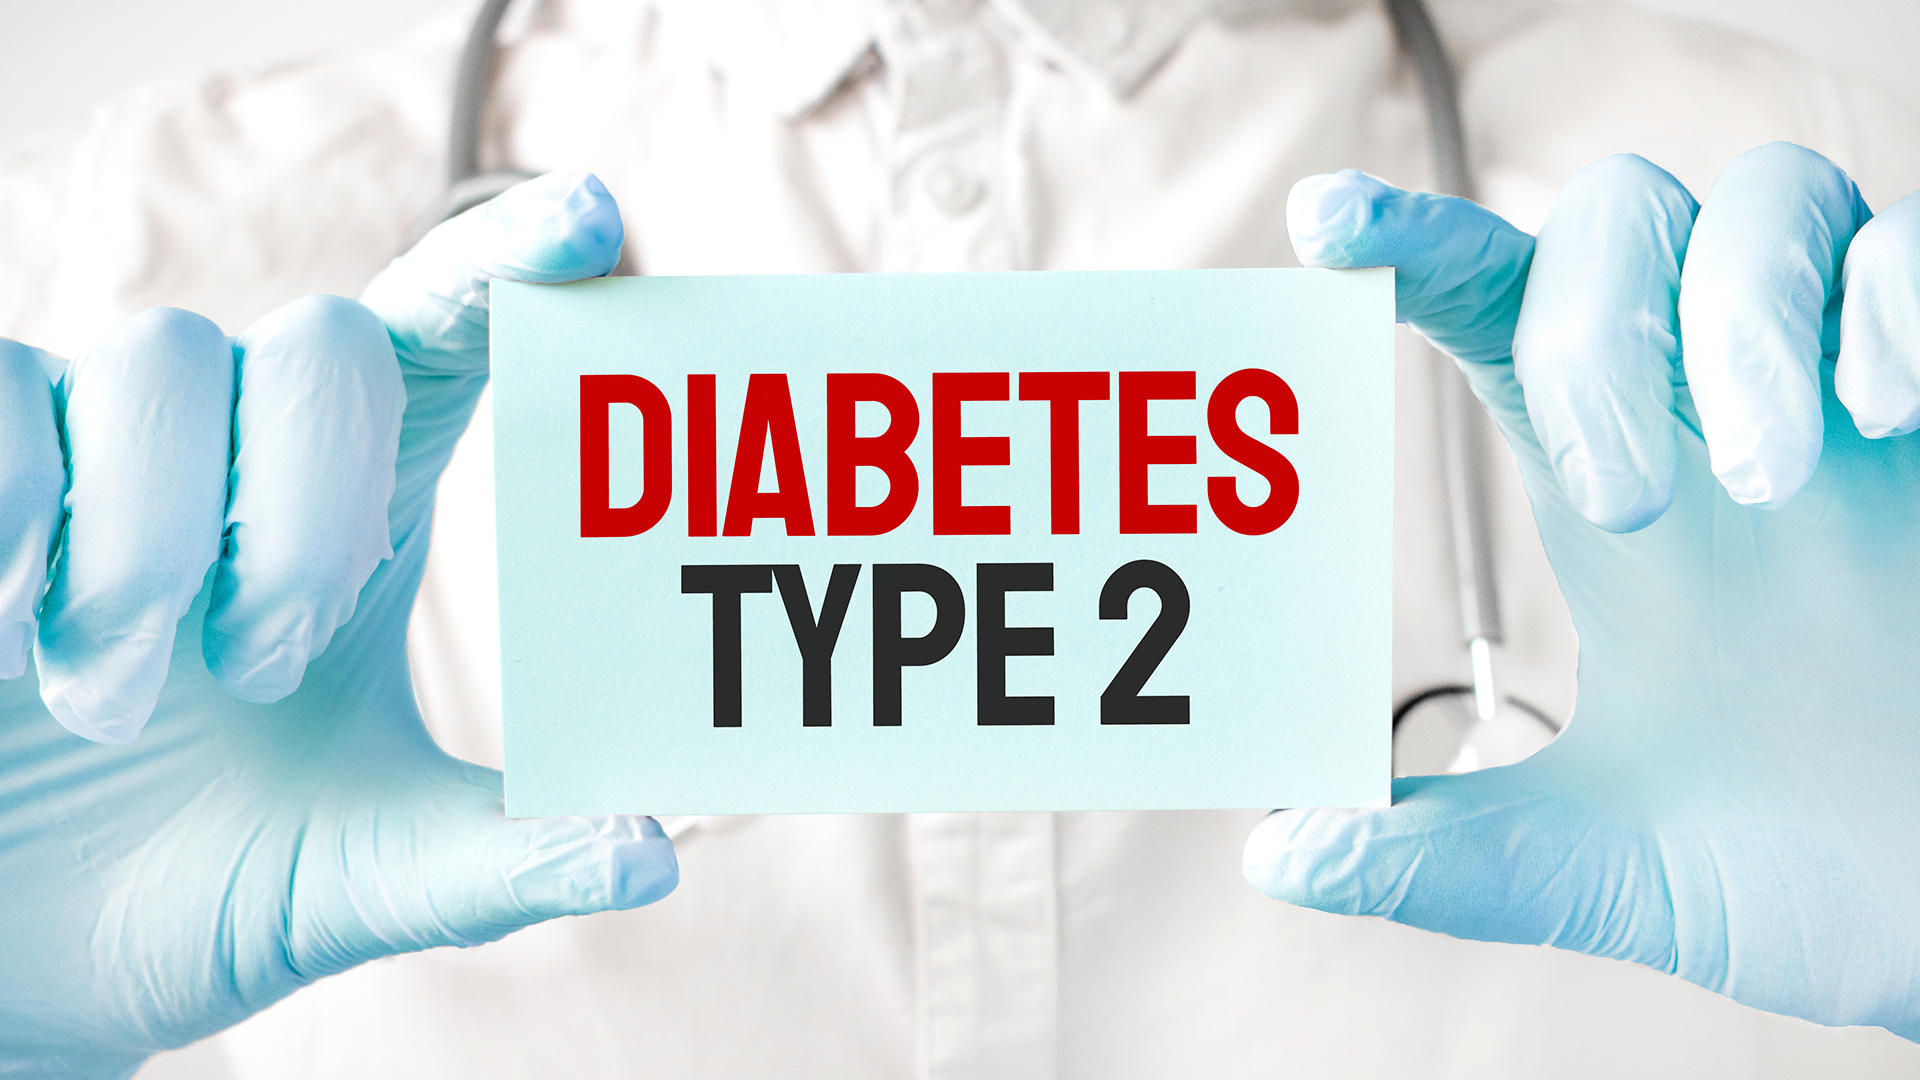 Doctor holding a diabetes type 2 sign for patients to join a clinical study